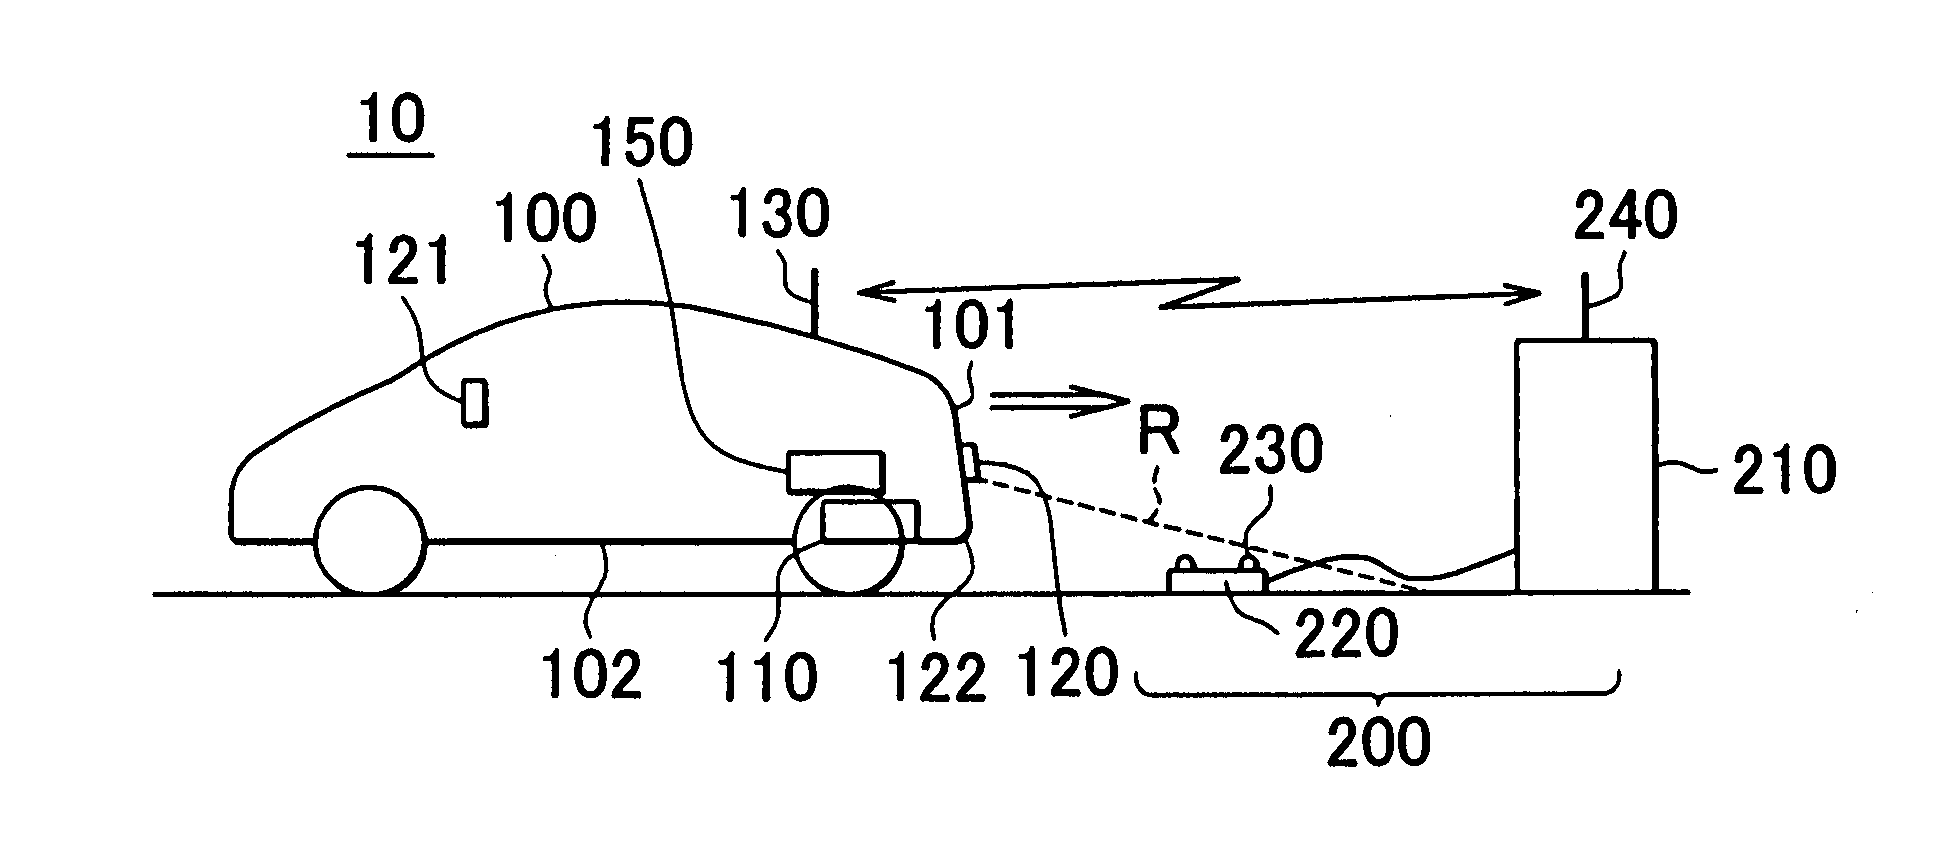 Inductively charged vehicle with automatic positioning